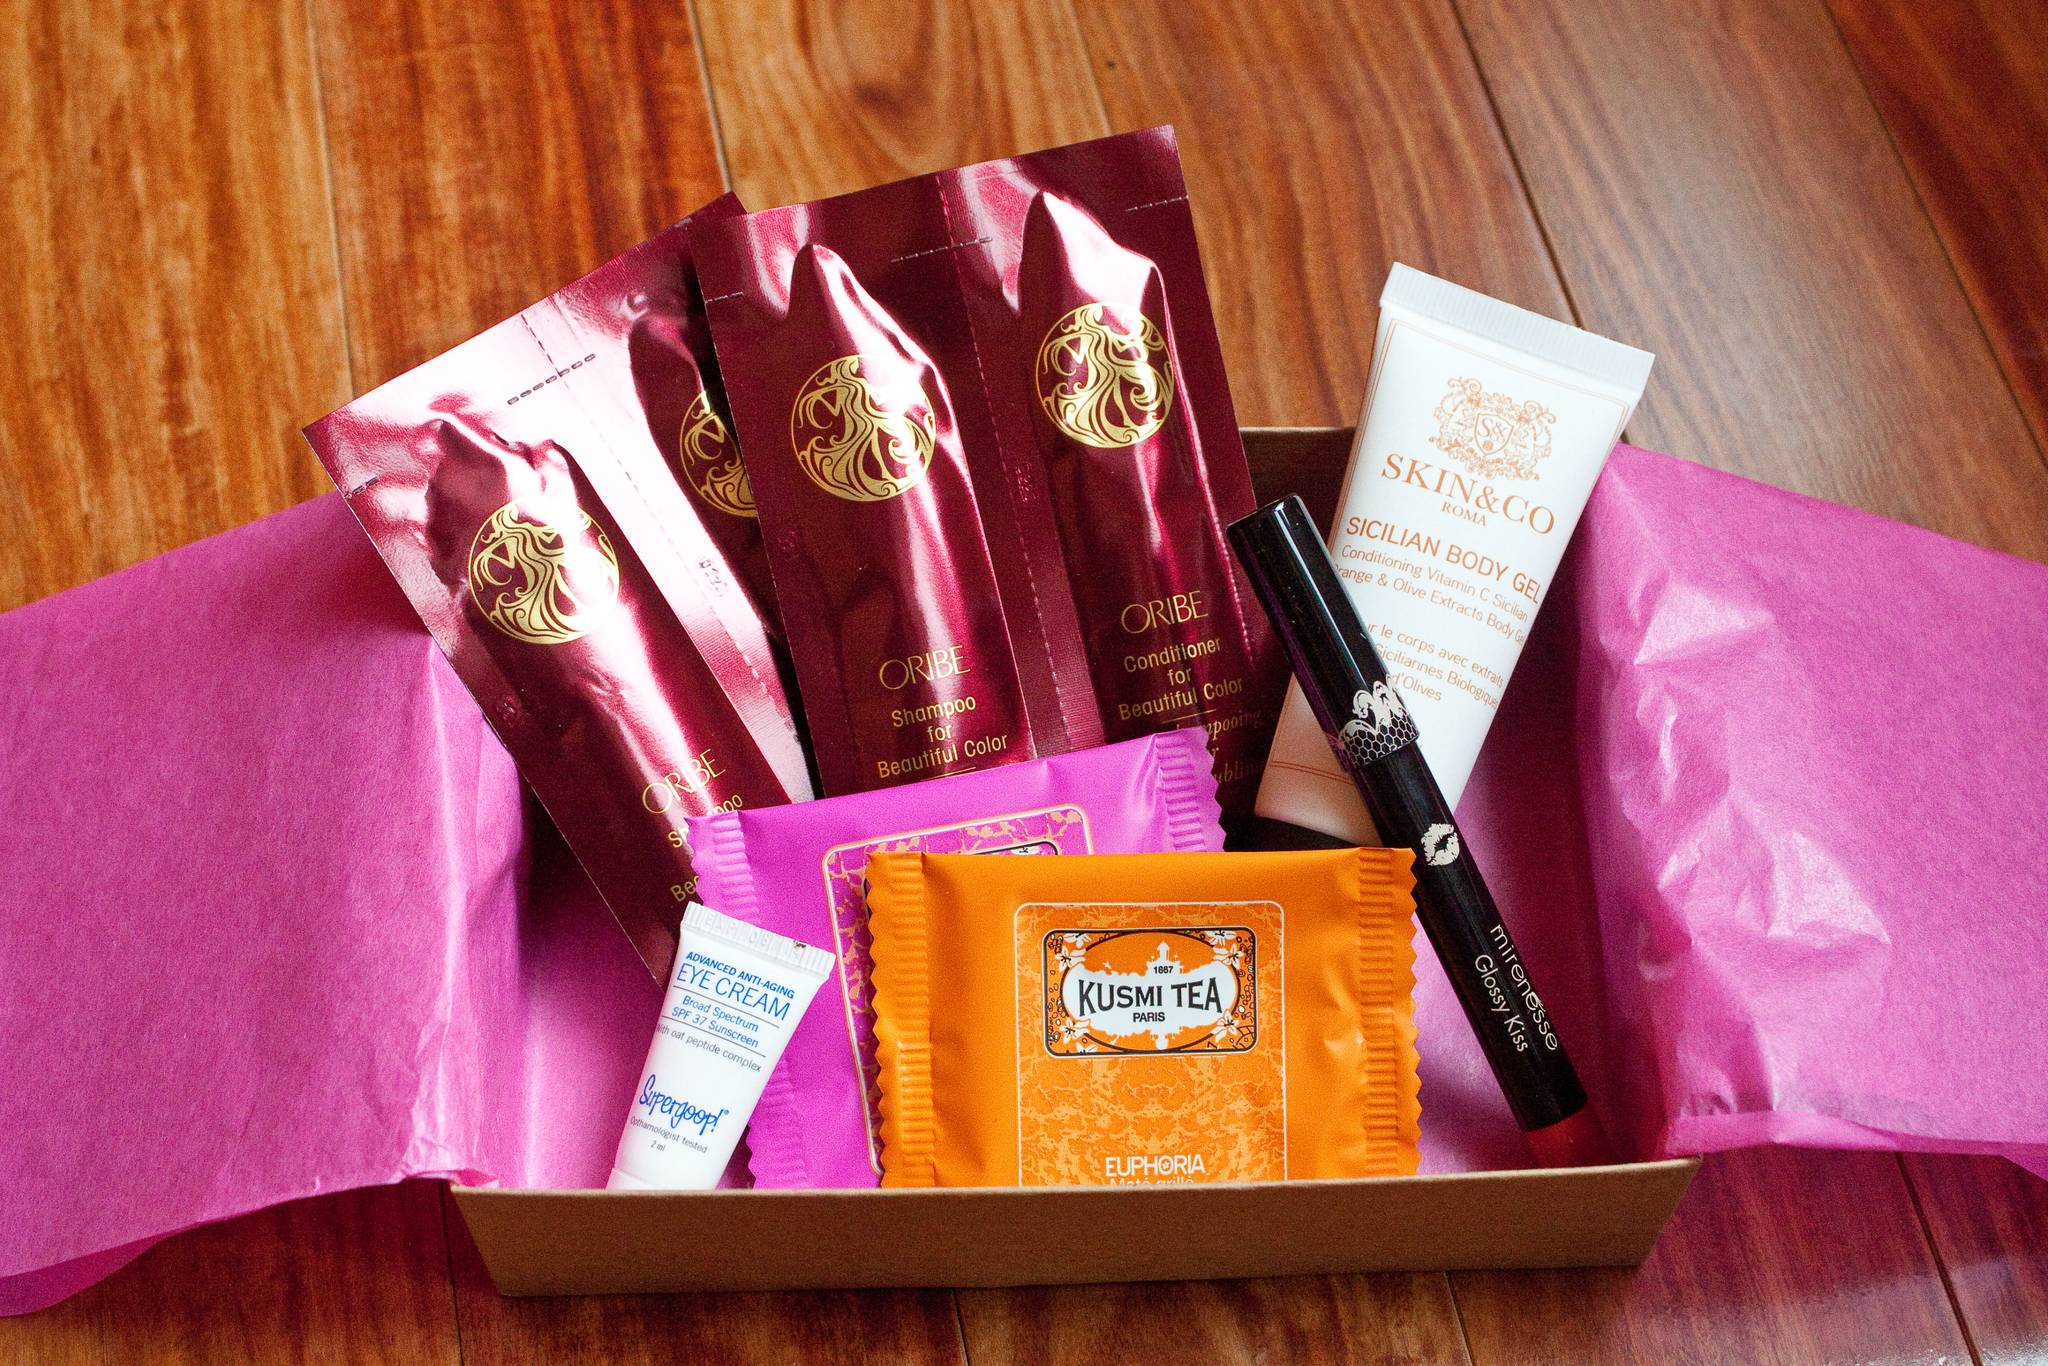 Subscription boxes work well for beauty brands